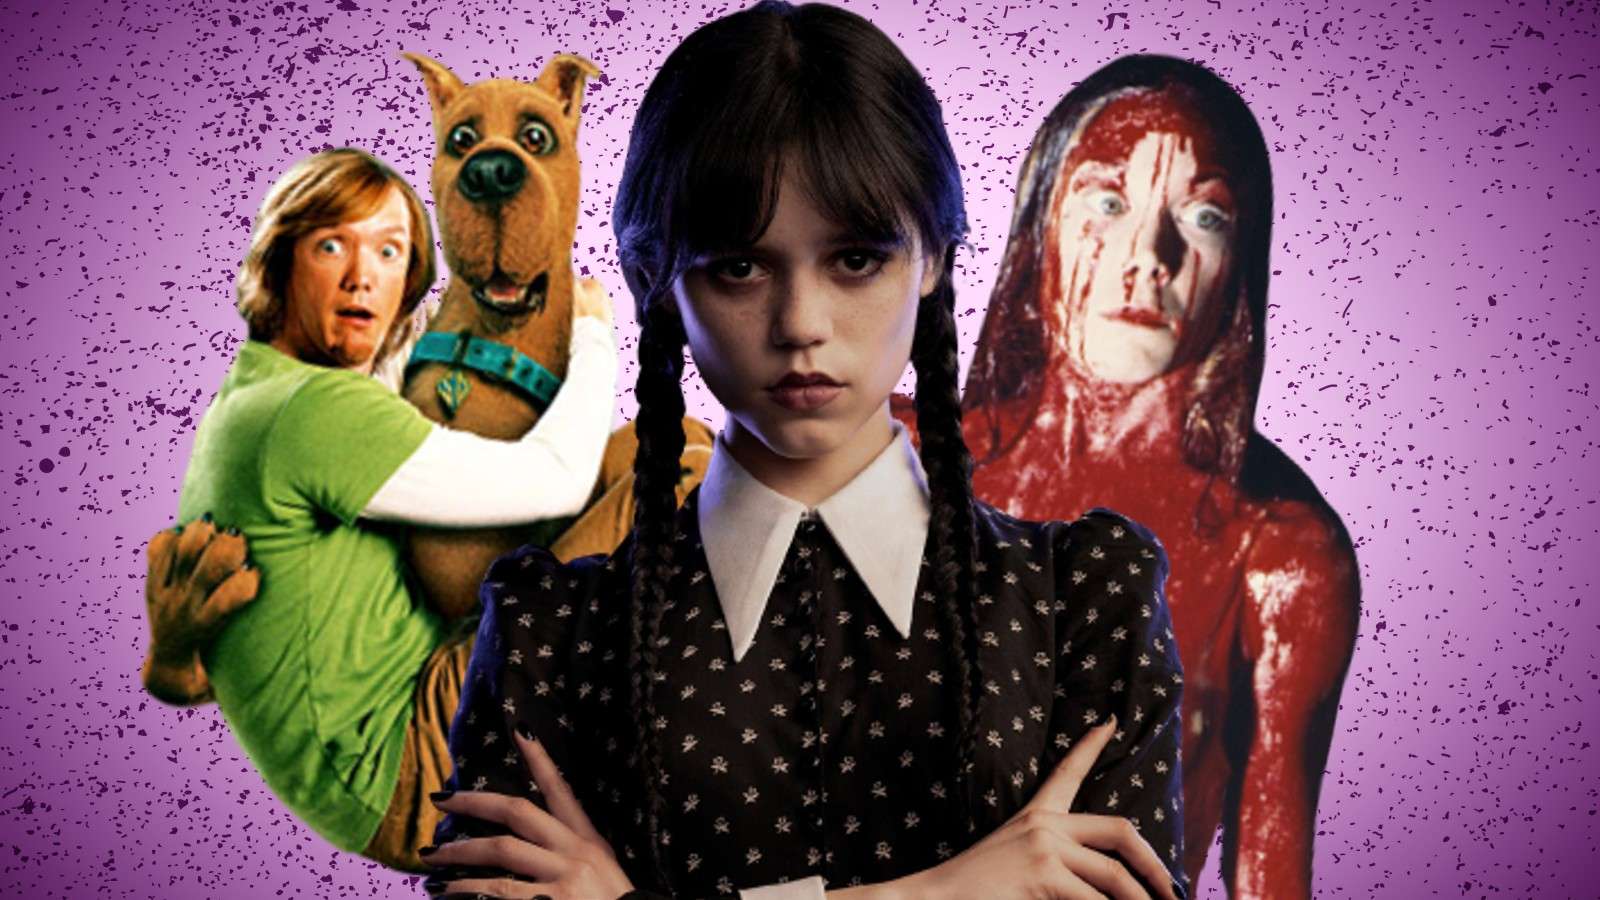 Jenna Ortega in Wednesday, Scooby Doo and Shaggy from the movie, and Carrie